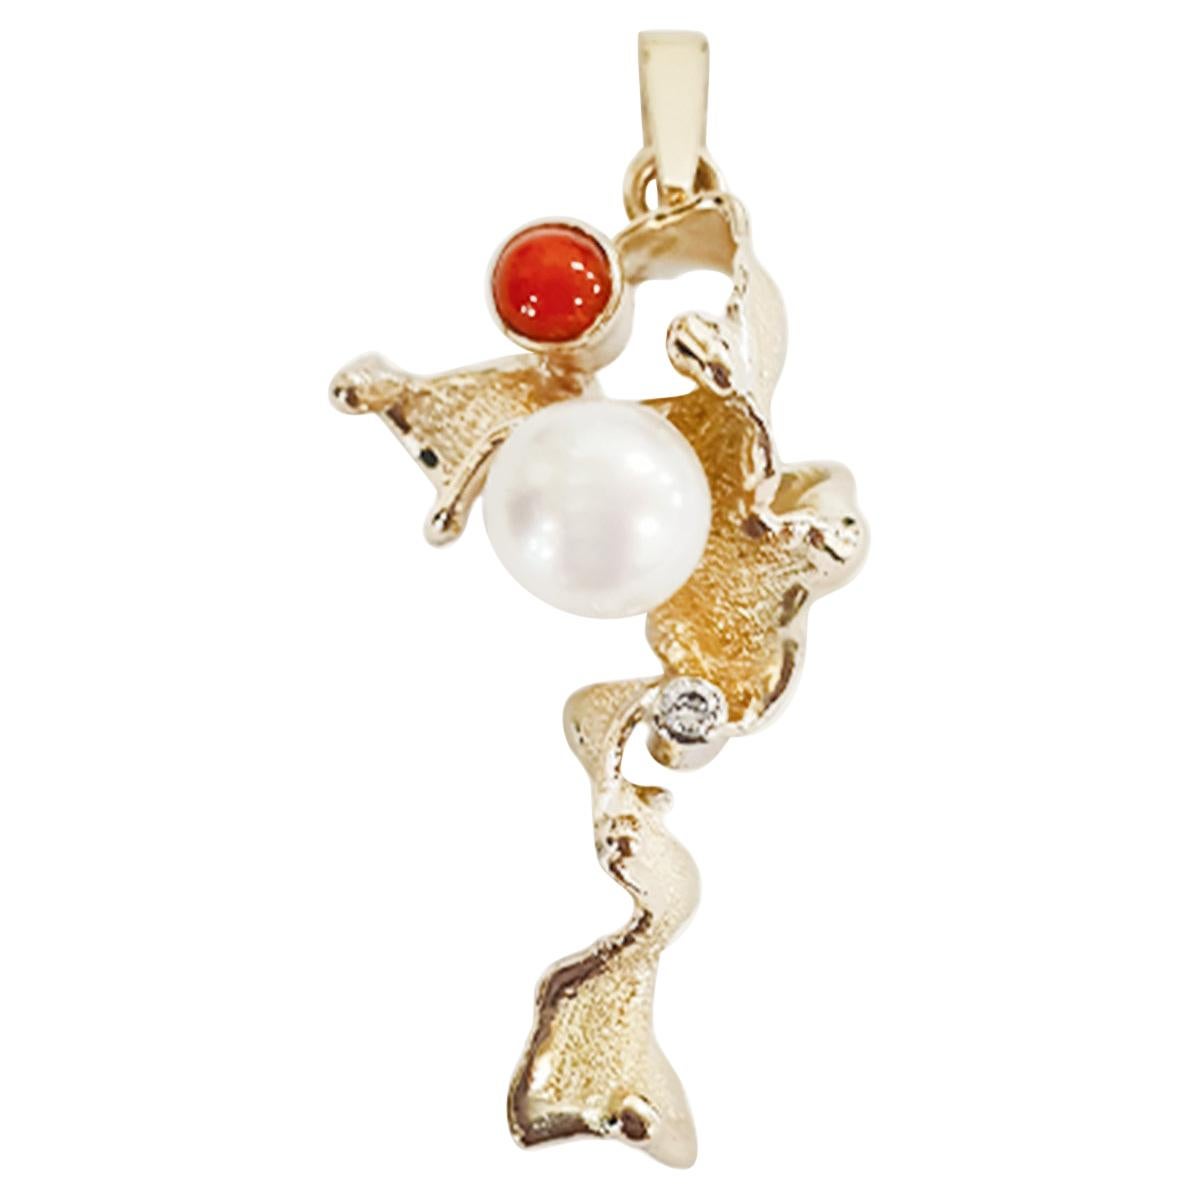 Paul Amey 9k Gold, Diamond, Pearl and Natural Red Coral Pendant